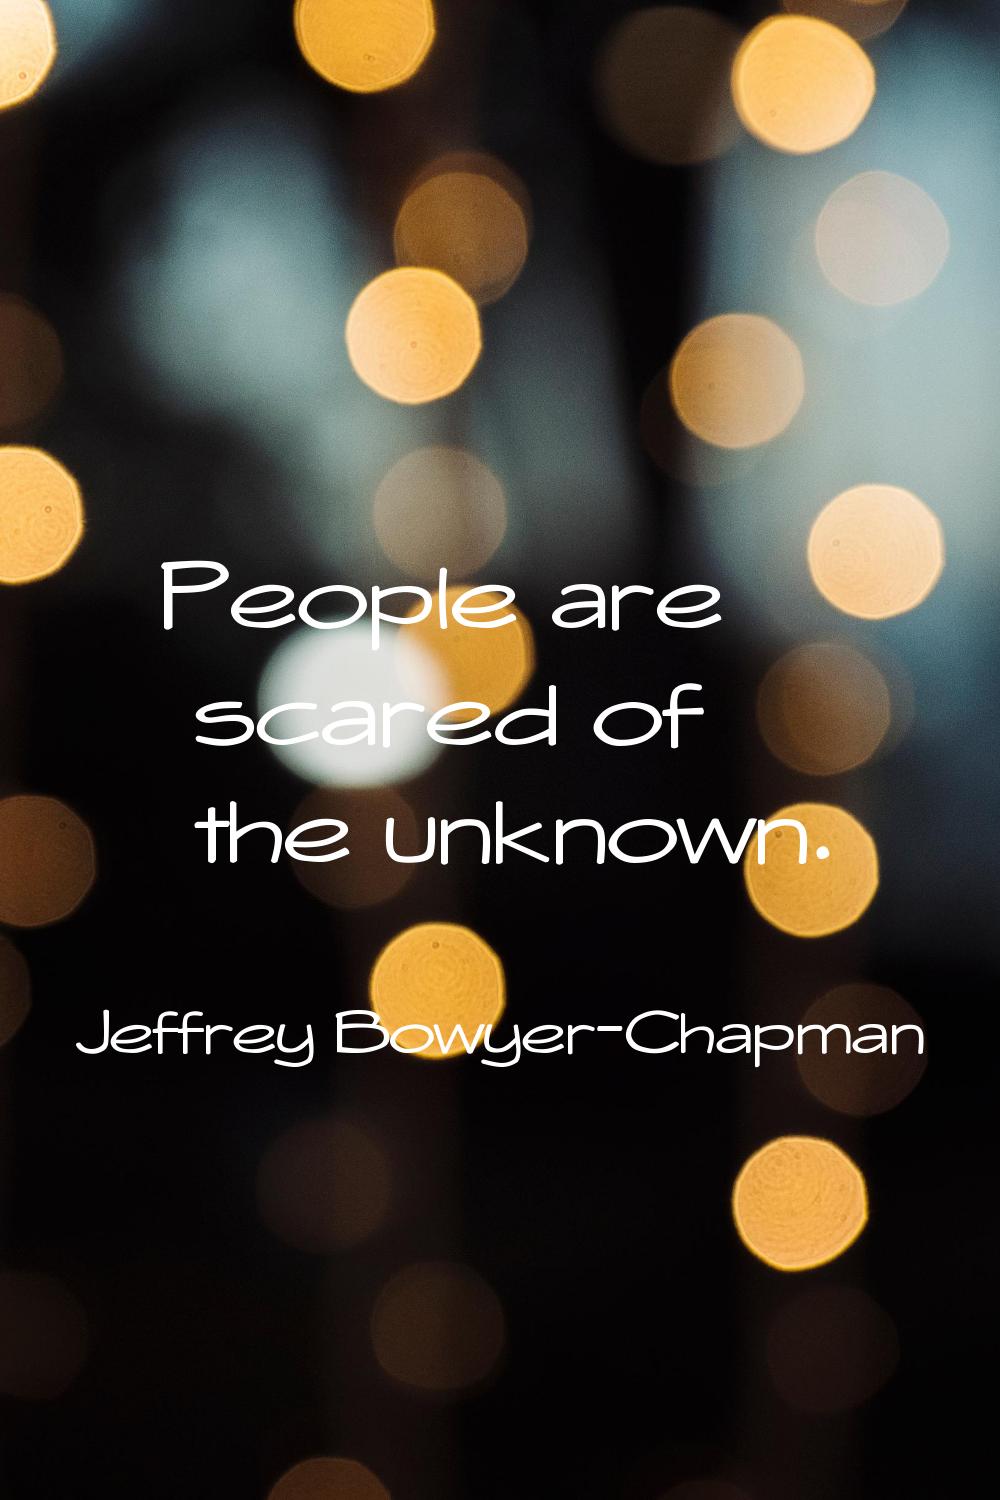 People are scared of the unknown.